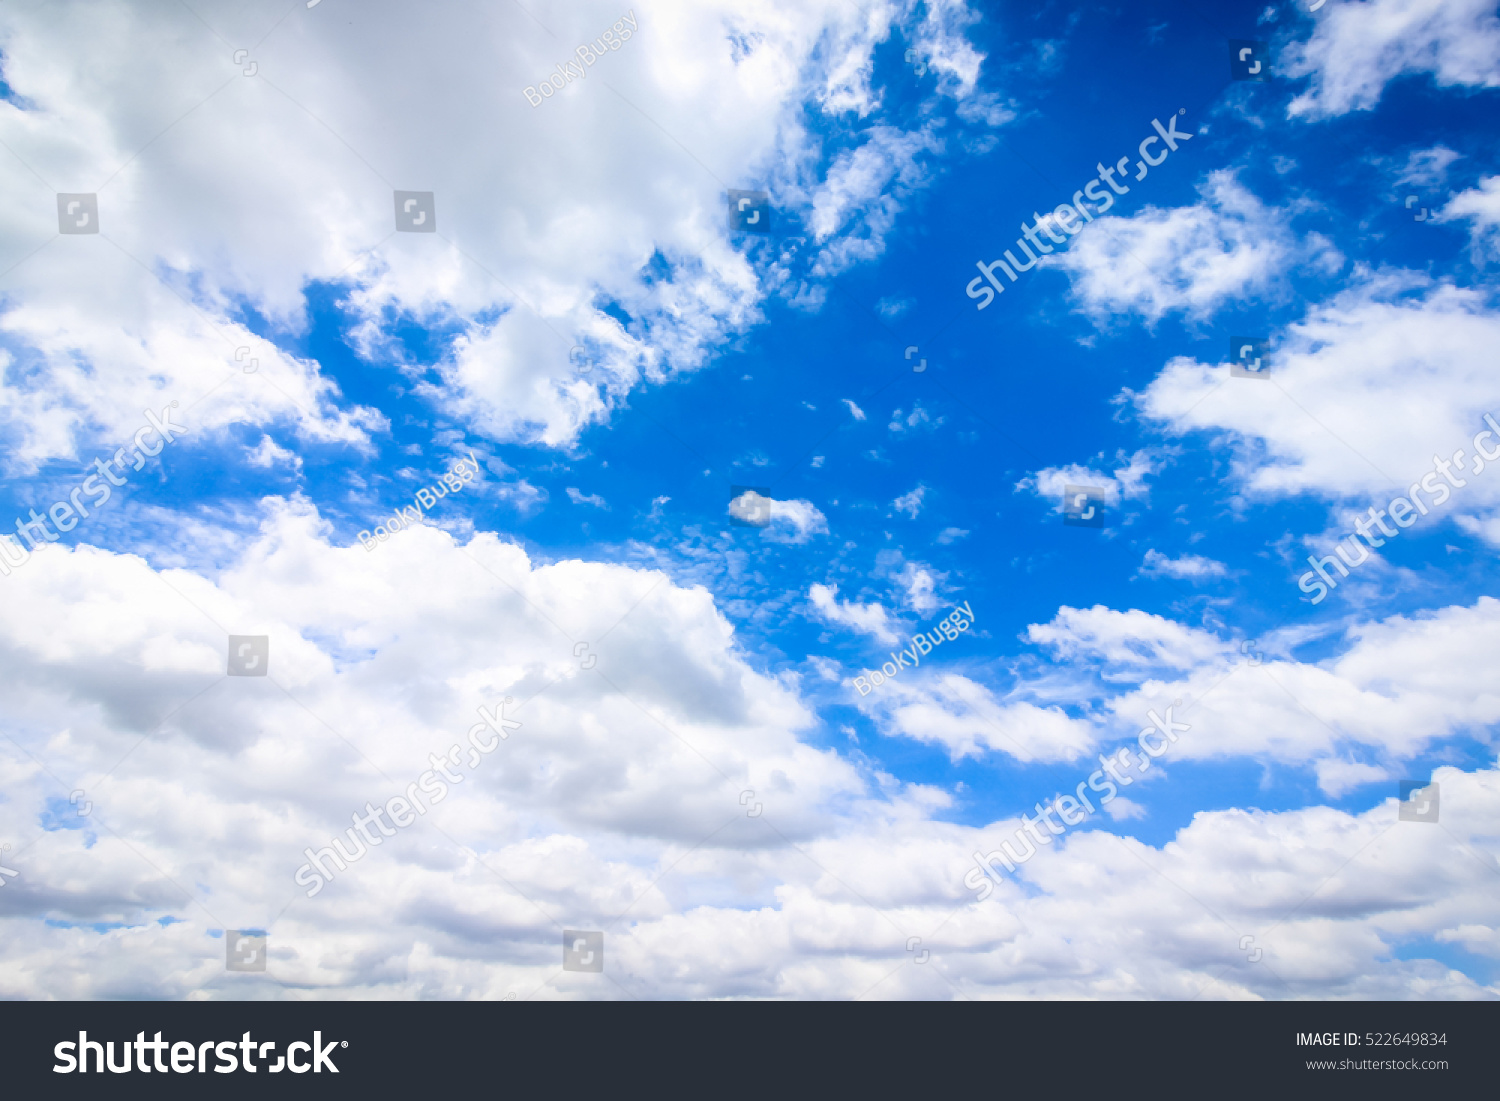 Clear Blue Sky Cloudy Background Wallpaper Stock Photo 522649834